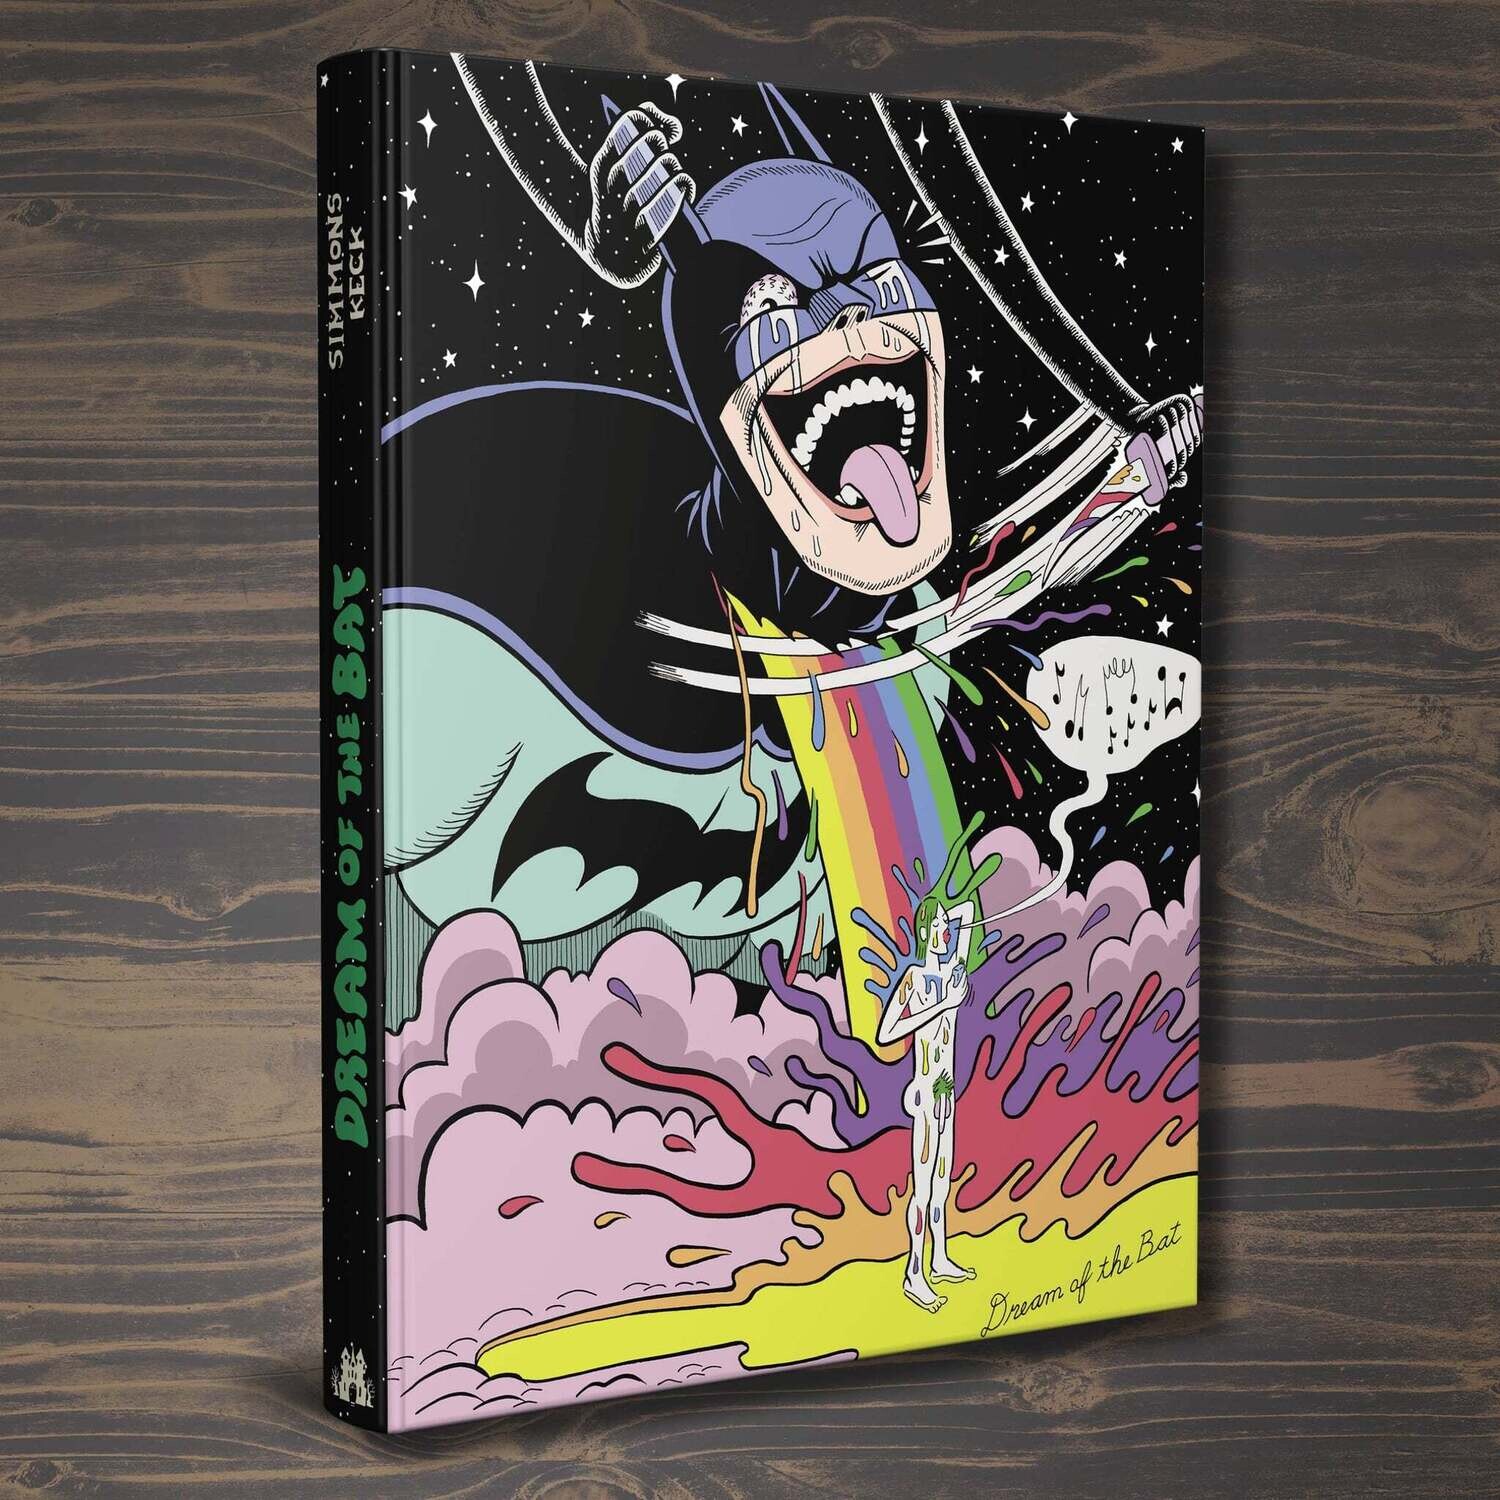 Dream of the Bat - Graphic Novel by Josh Simmons and Patrick Keck